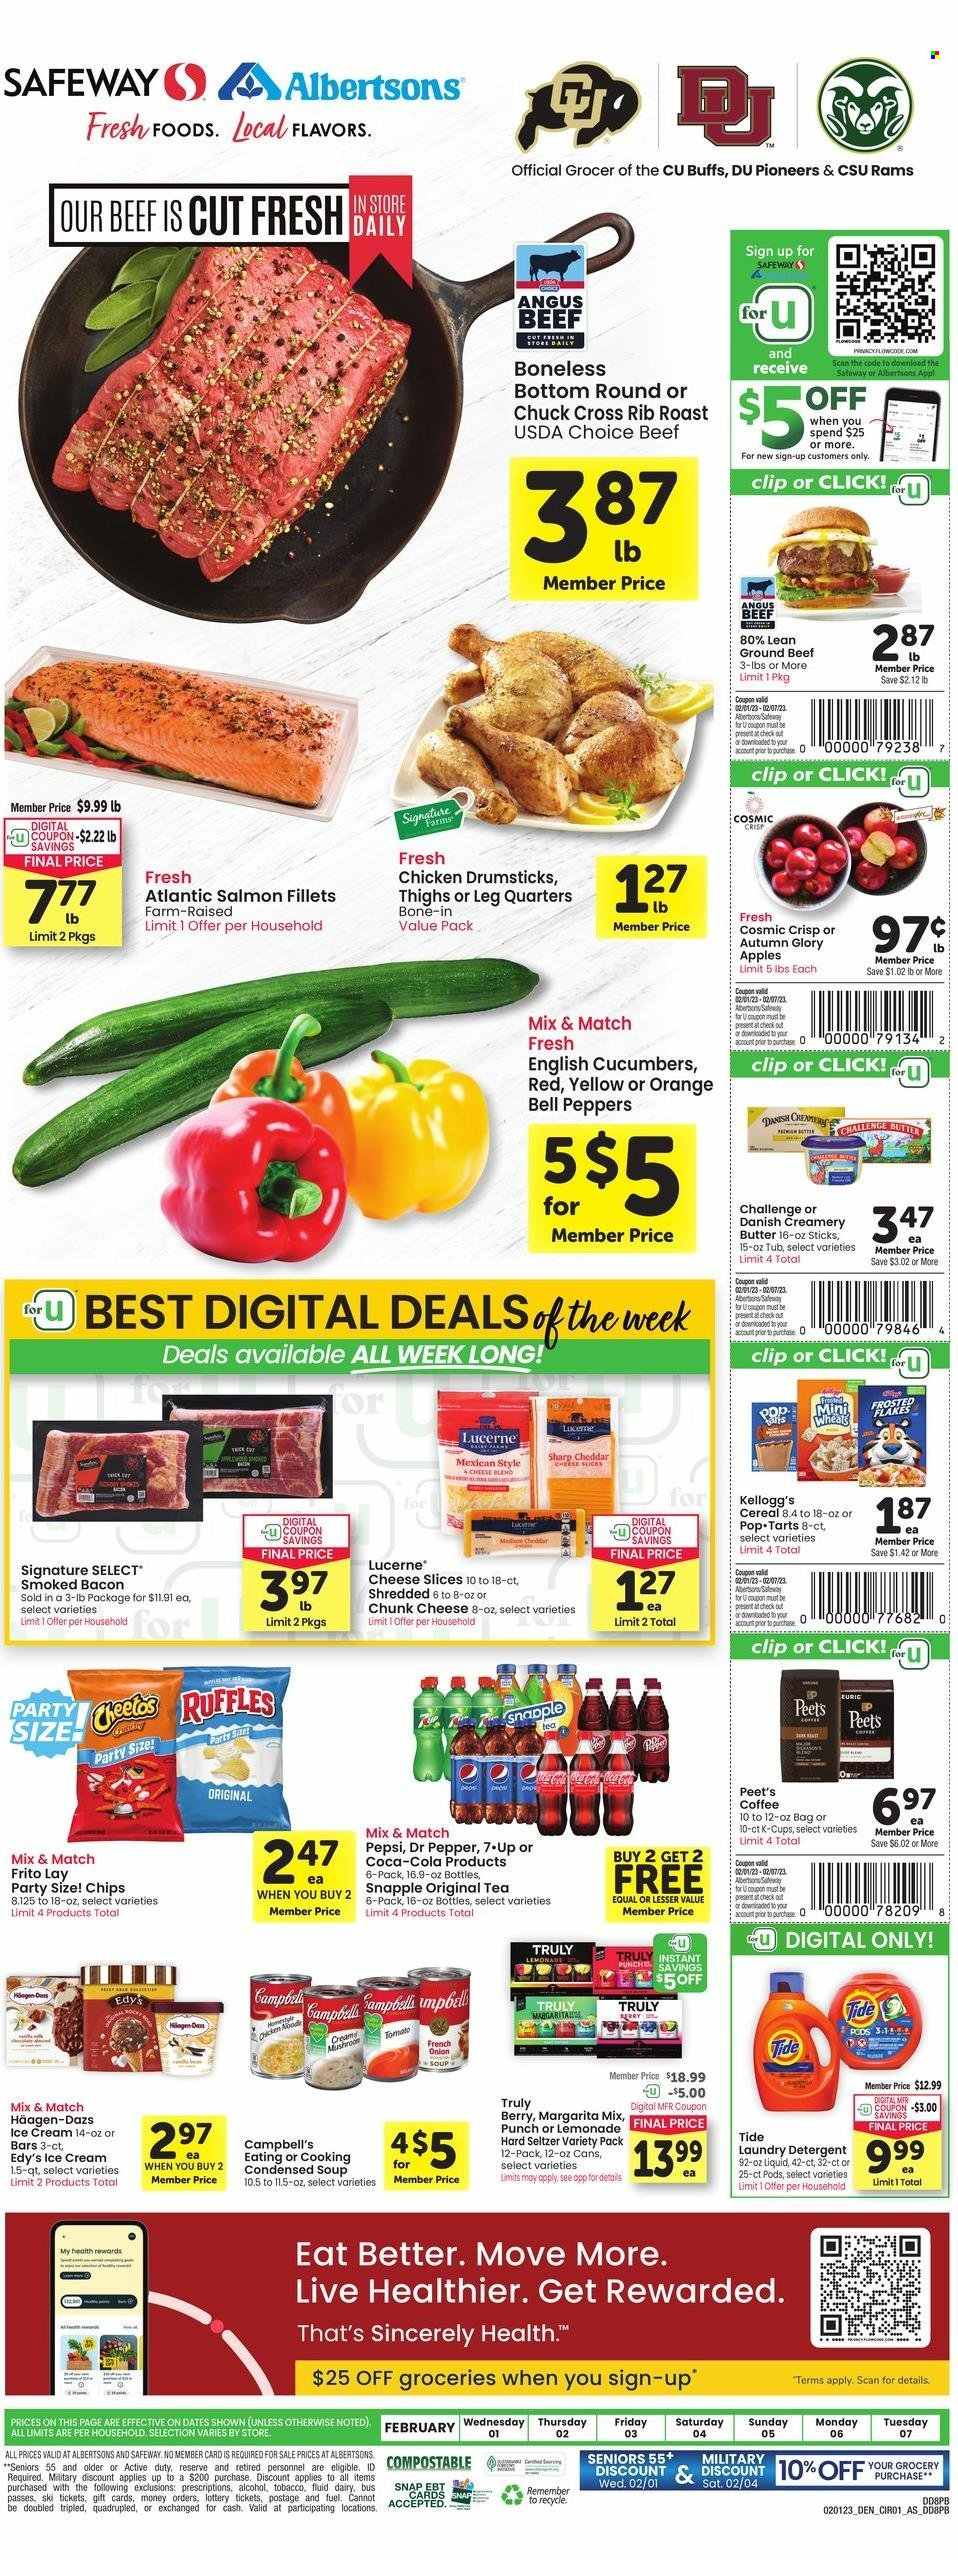 thumbnail - Albertsons Flyer - 02/01/2023 - 02/07/2023 - Sales products - bell peppers, peppers, apples, oranges, salmon, salmon fillet, Campbell's, condensed soup, soup, instant soup, bacon, ham, sliced cheese, cheese, chunk cheese, creamer, ice cream, Häagen-Dazs, Kellogg's, Pop-Tarts, Cheetos, chips, Ruffles, cereals, Coca-Cola, Pepsi, Dr. Pepper, Snapple, Margarita Mix, tea, coffee capsules, K-Cups, punch, Hard Seltzer, TRULY, chicken drumsticks, beef meat, ground beef, detergent, Tide, laundry detergent. Page 1.